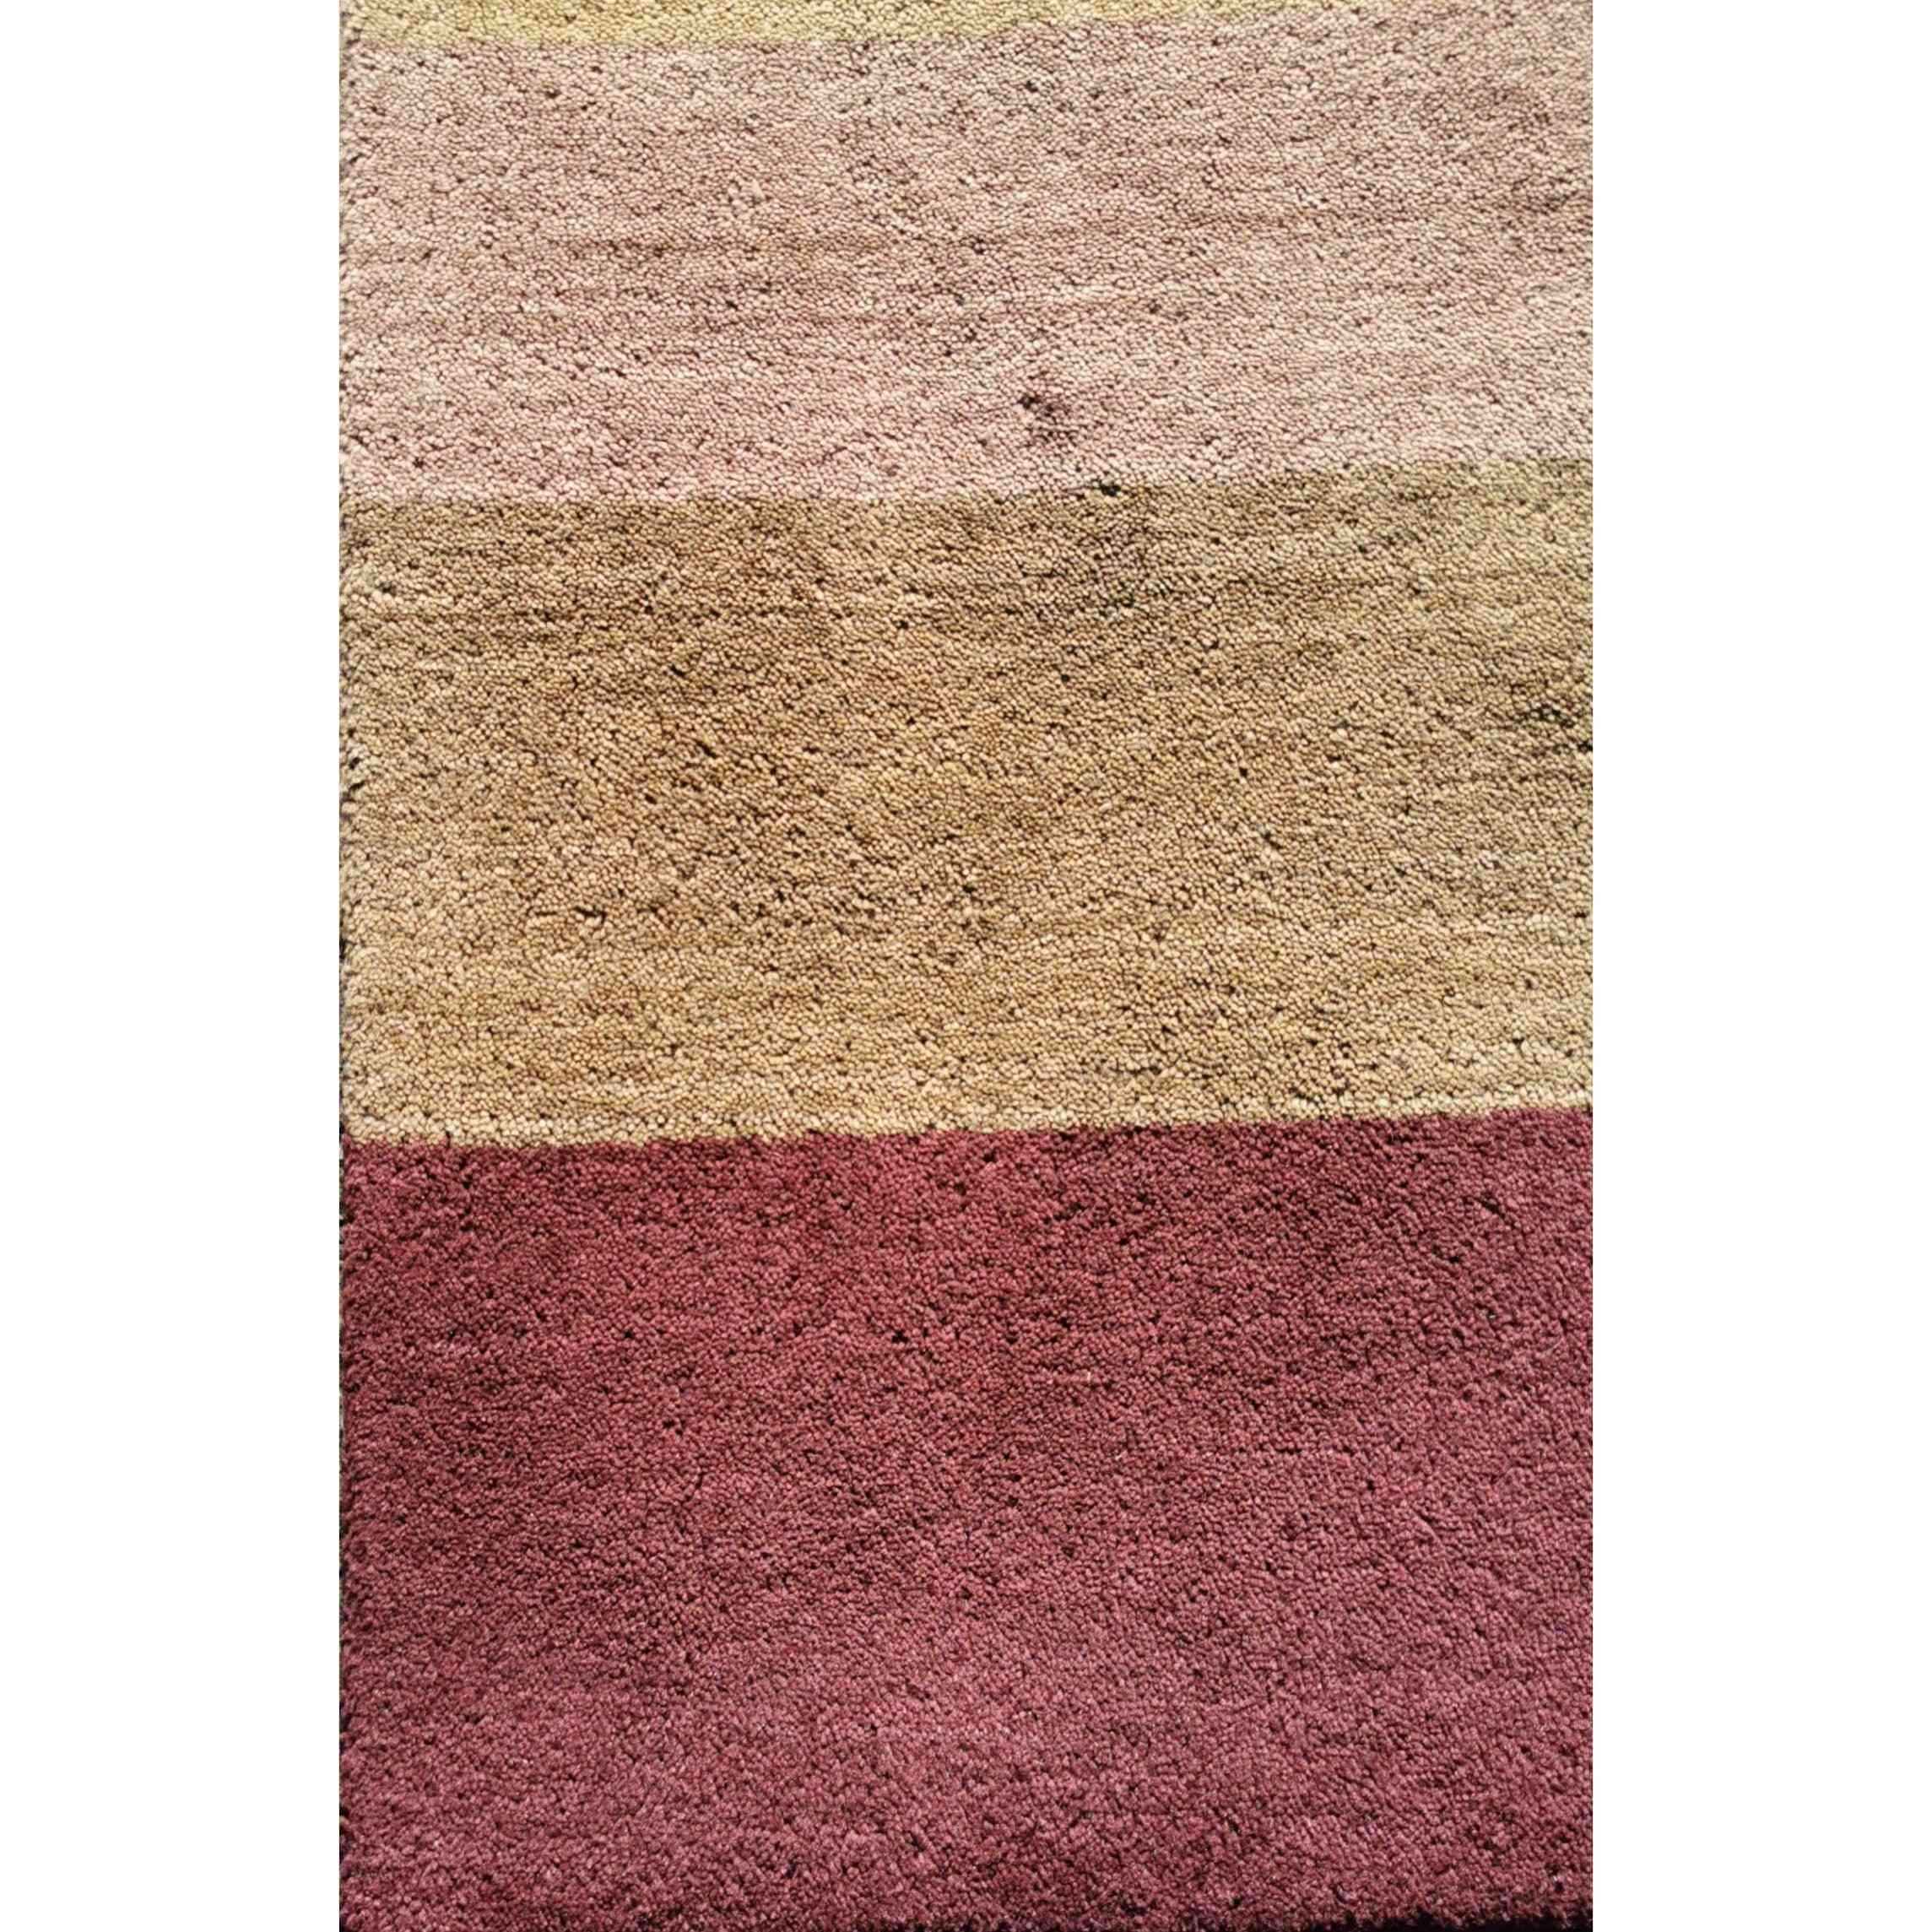 185 x 130 cm Contemporary Modern Brown Rug - Rugmaster